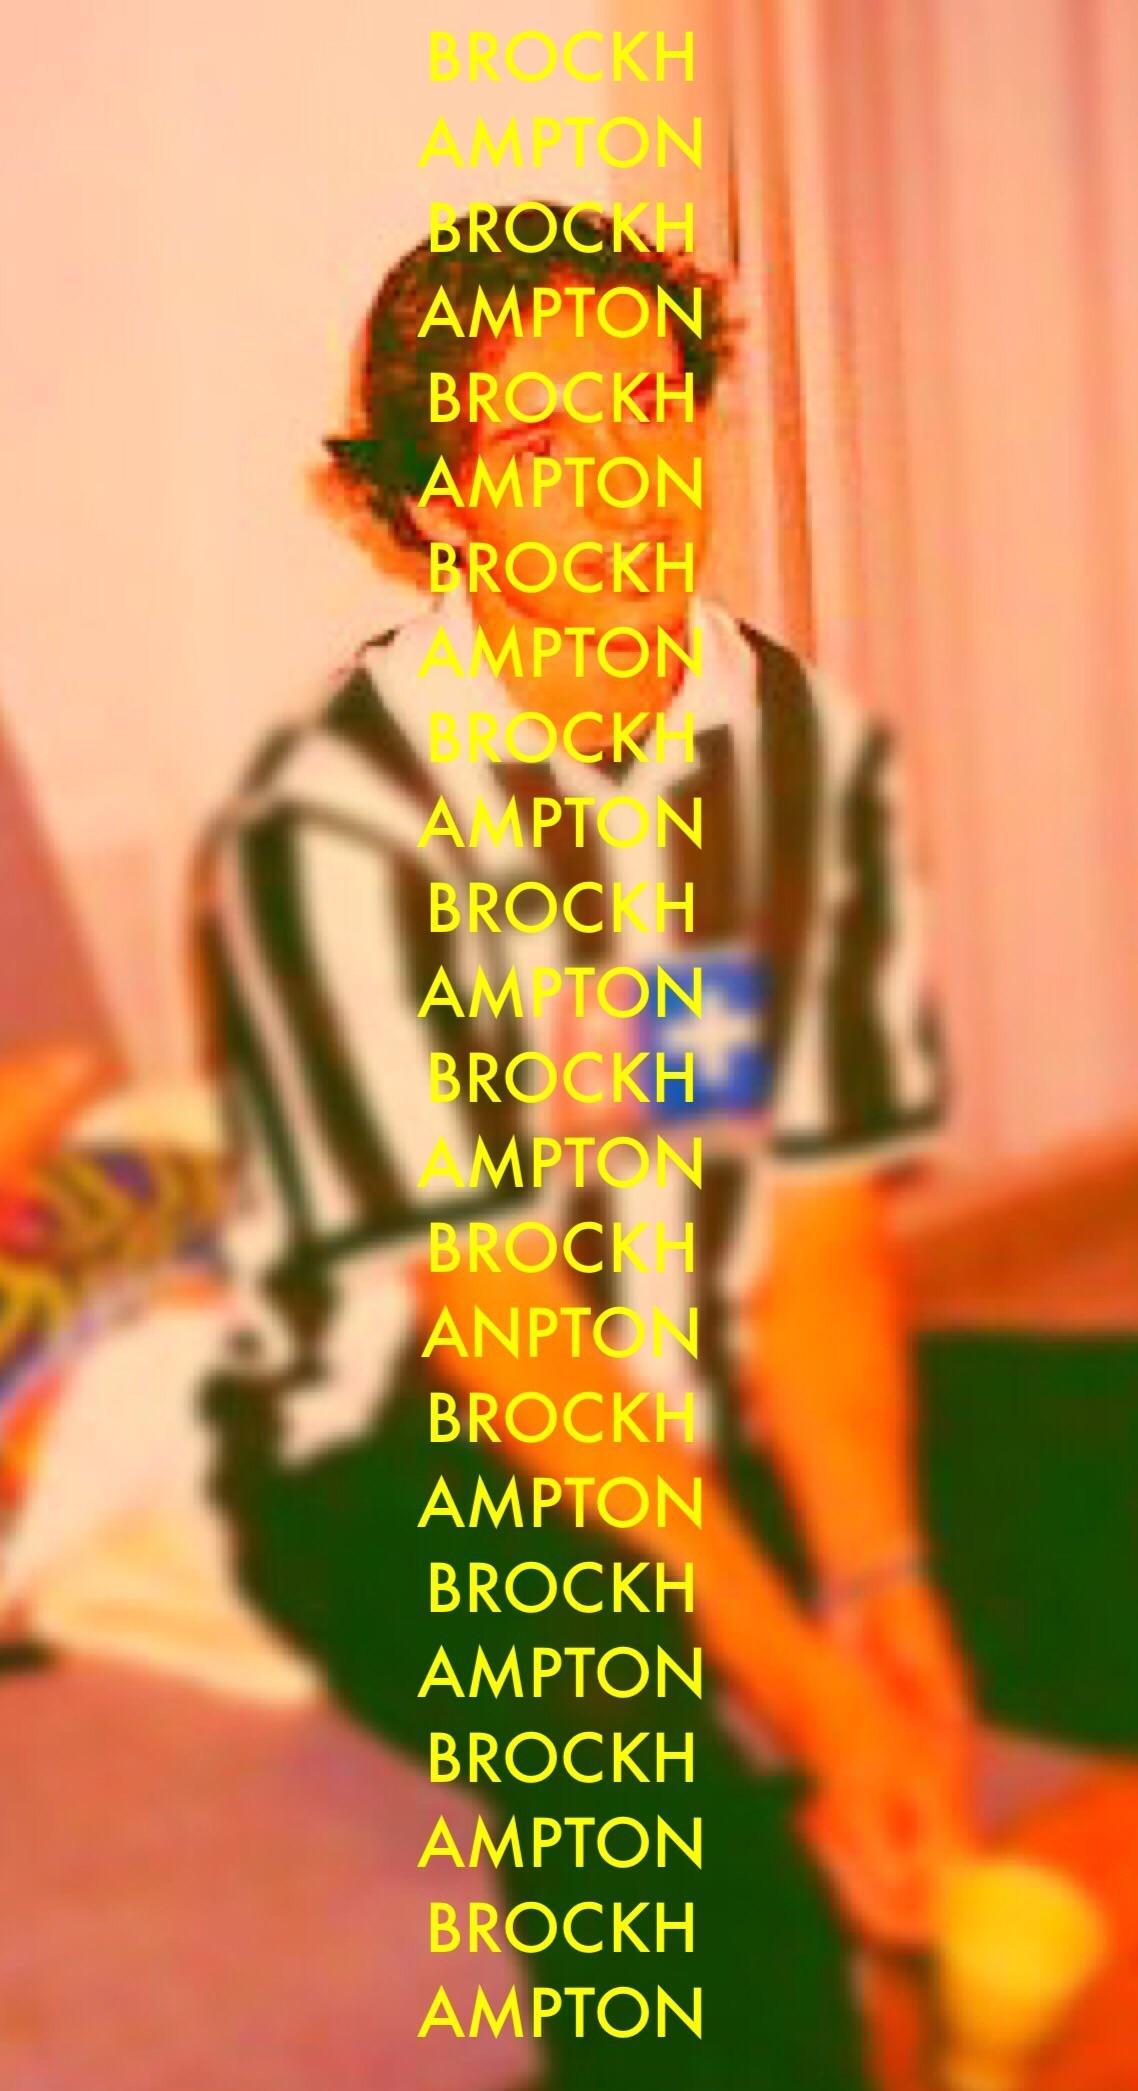 BROCKHAMPTON iPhone Wallpaper or whatever you'd like to use